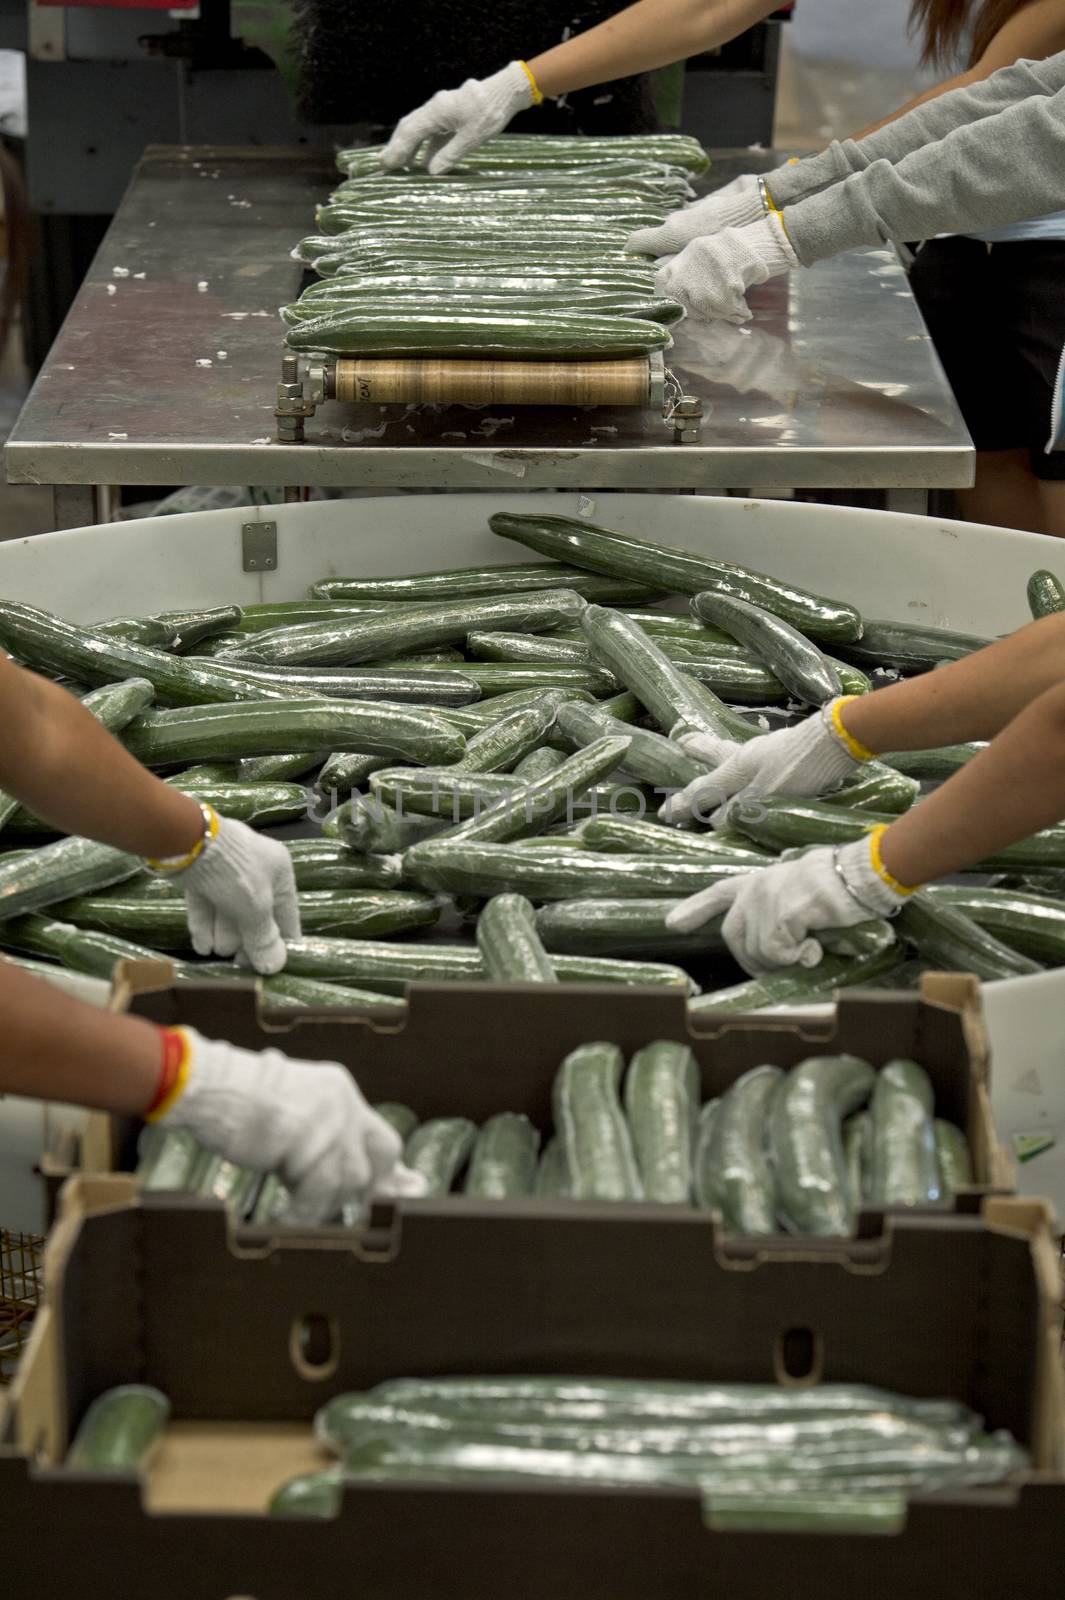 Processing cucumbers in the factory ready for transport to markets and shops